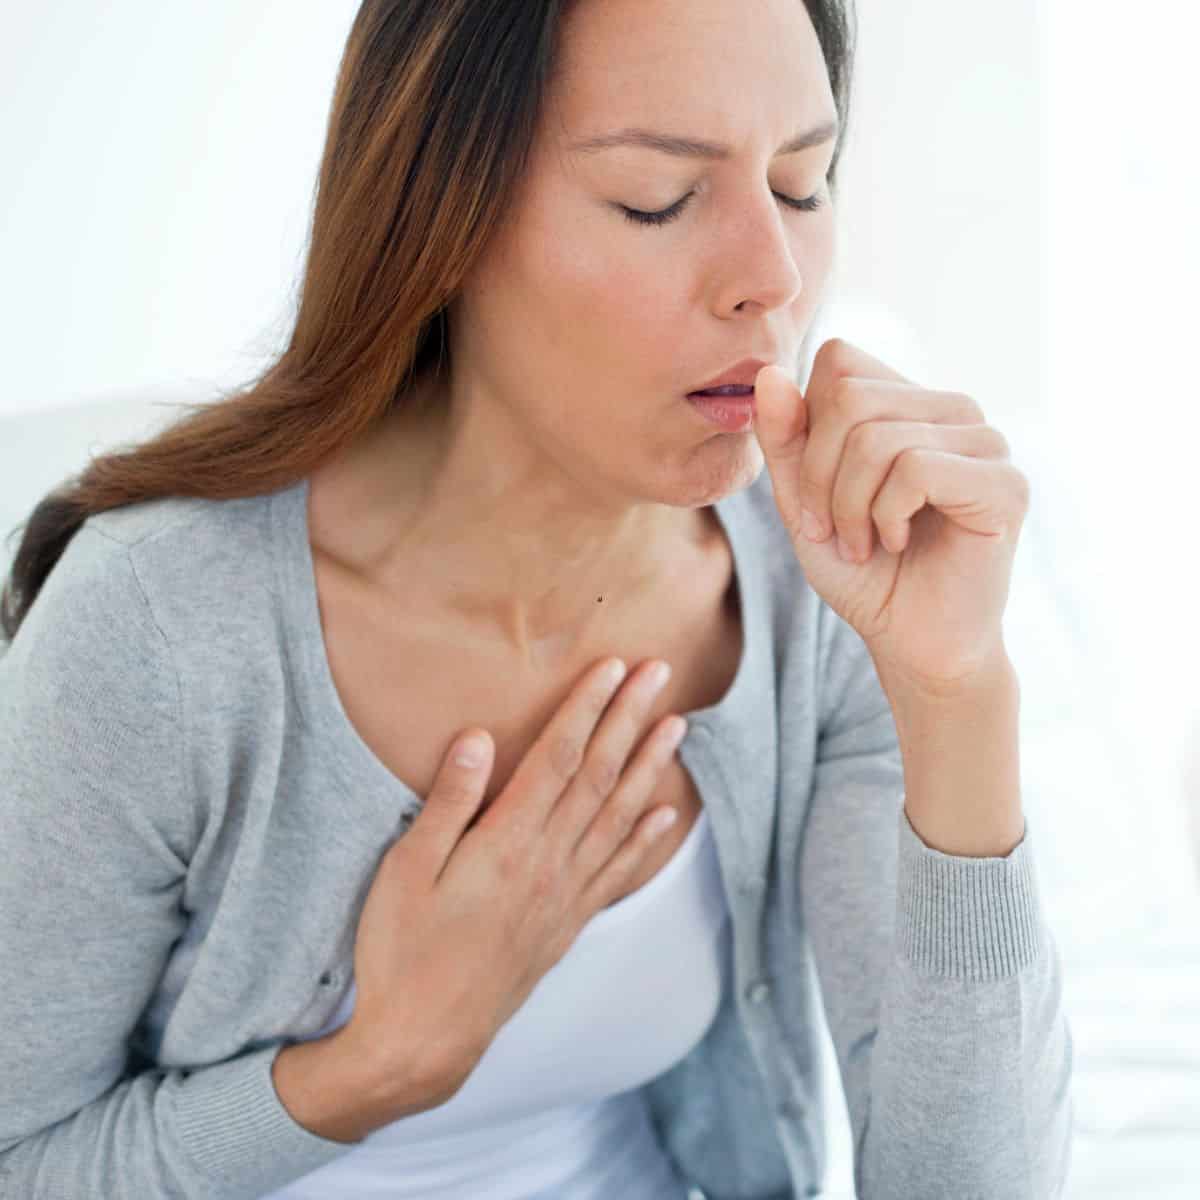 Woman coughing.